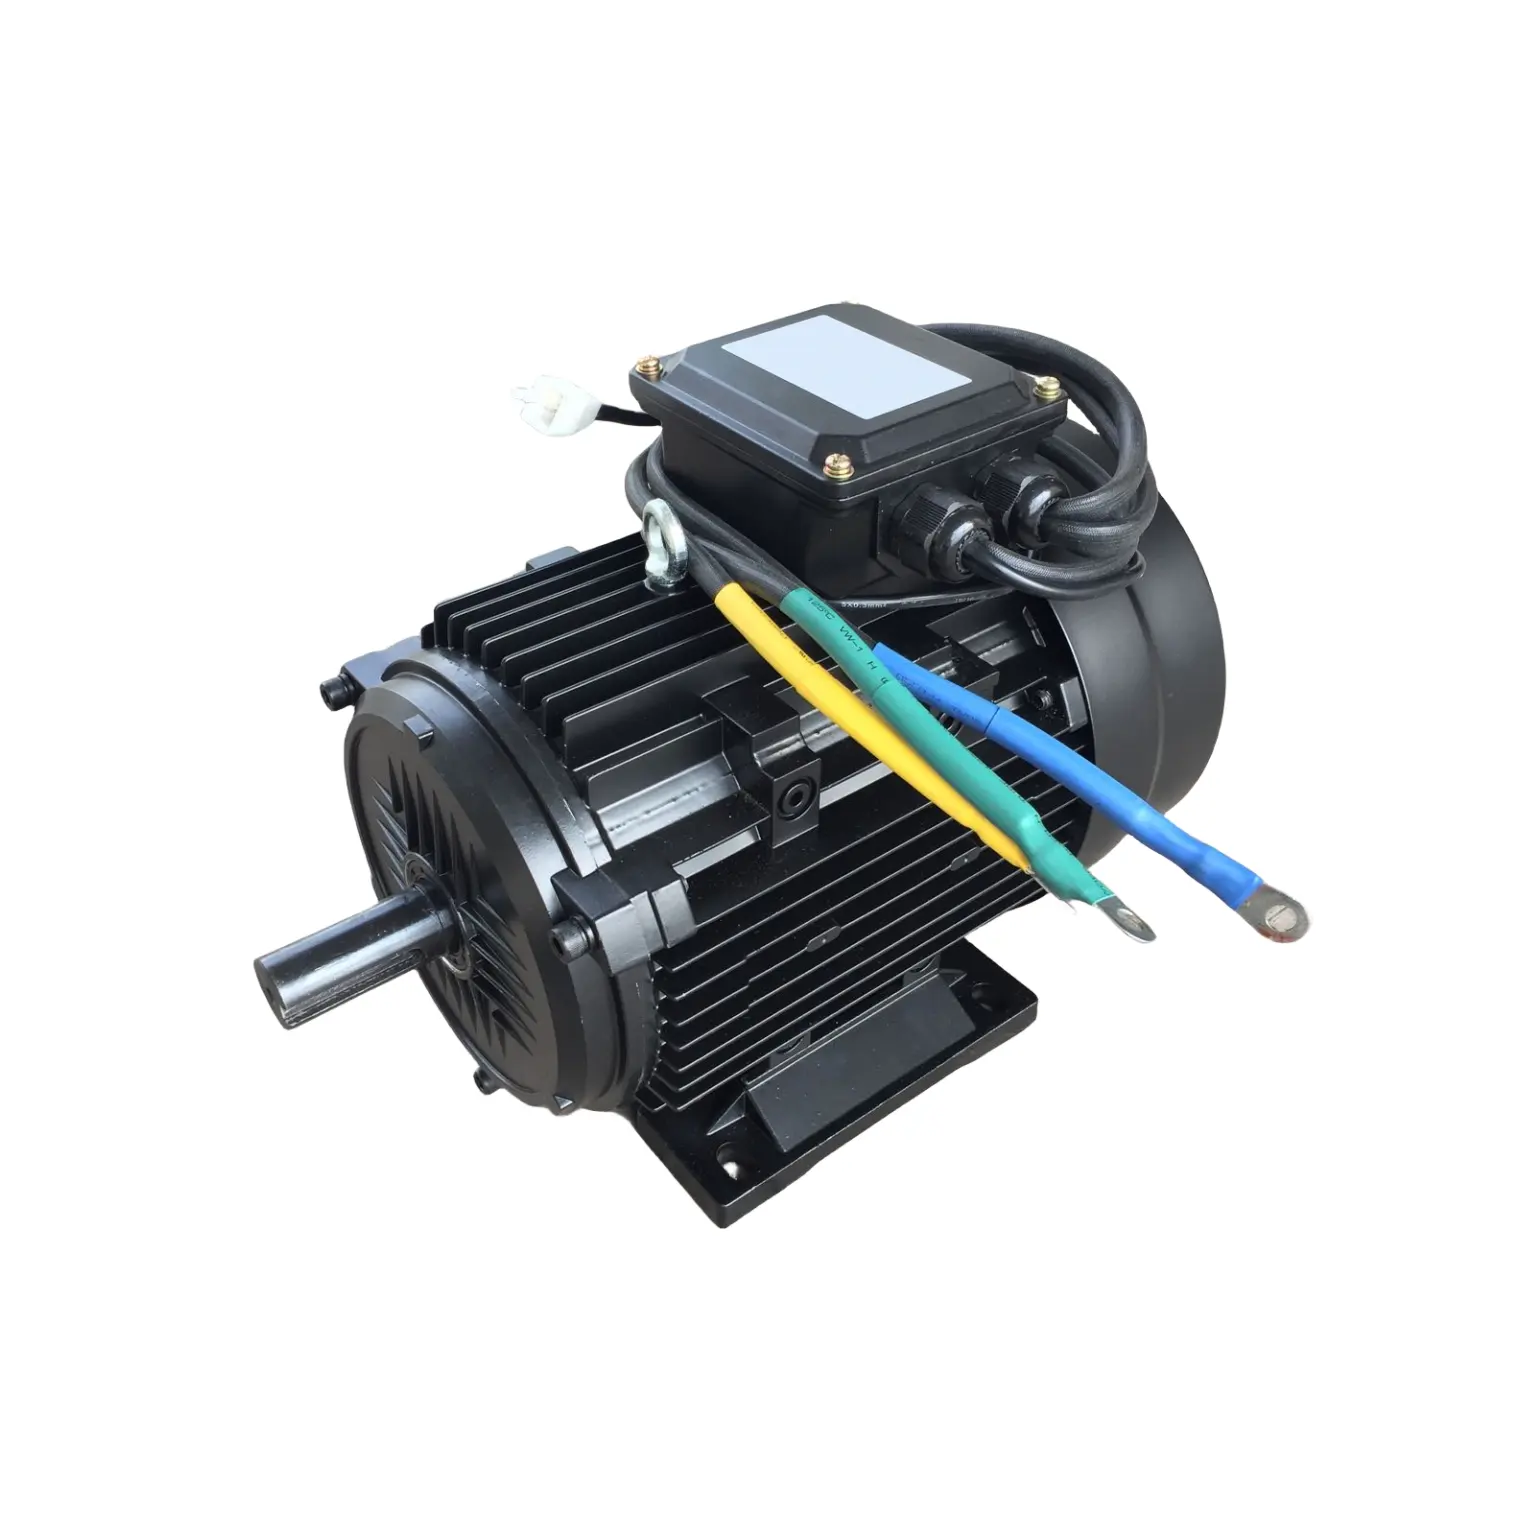 BLDC Motor 48V 4.0KW 3200RPM Brushless DC Motor for High Pressure Fire Water Pump